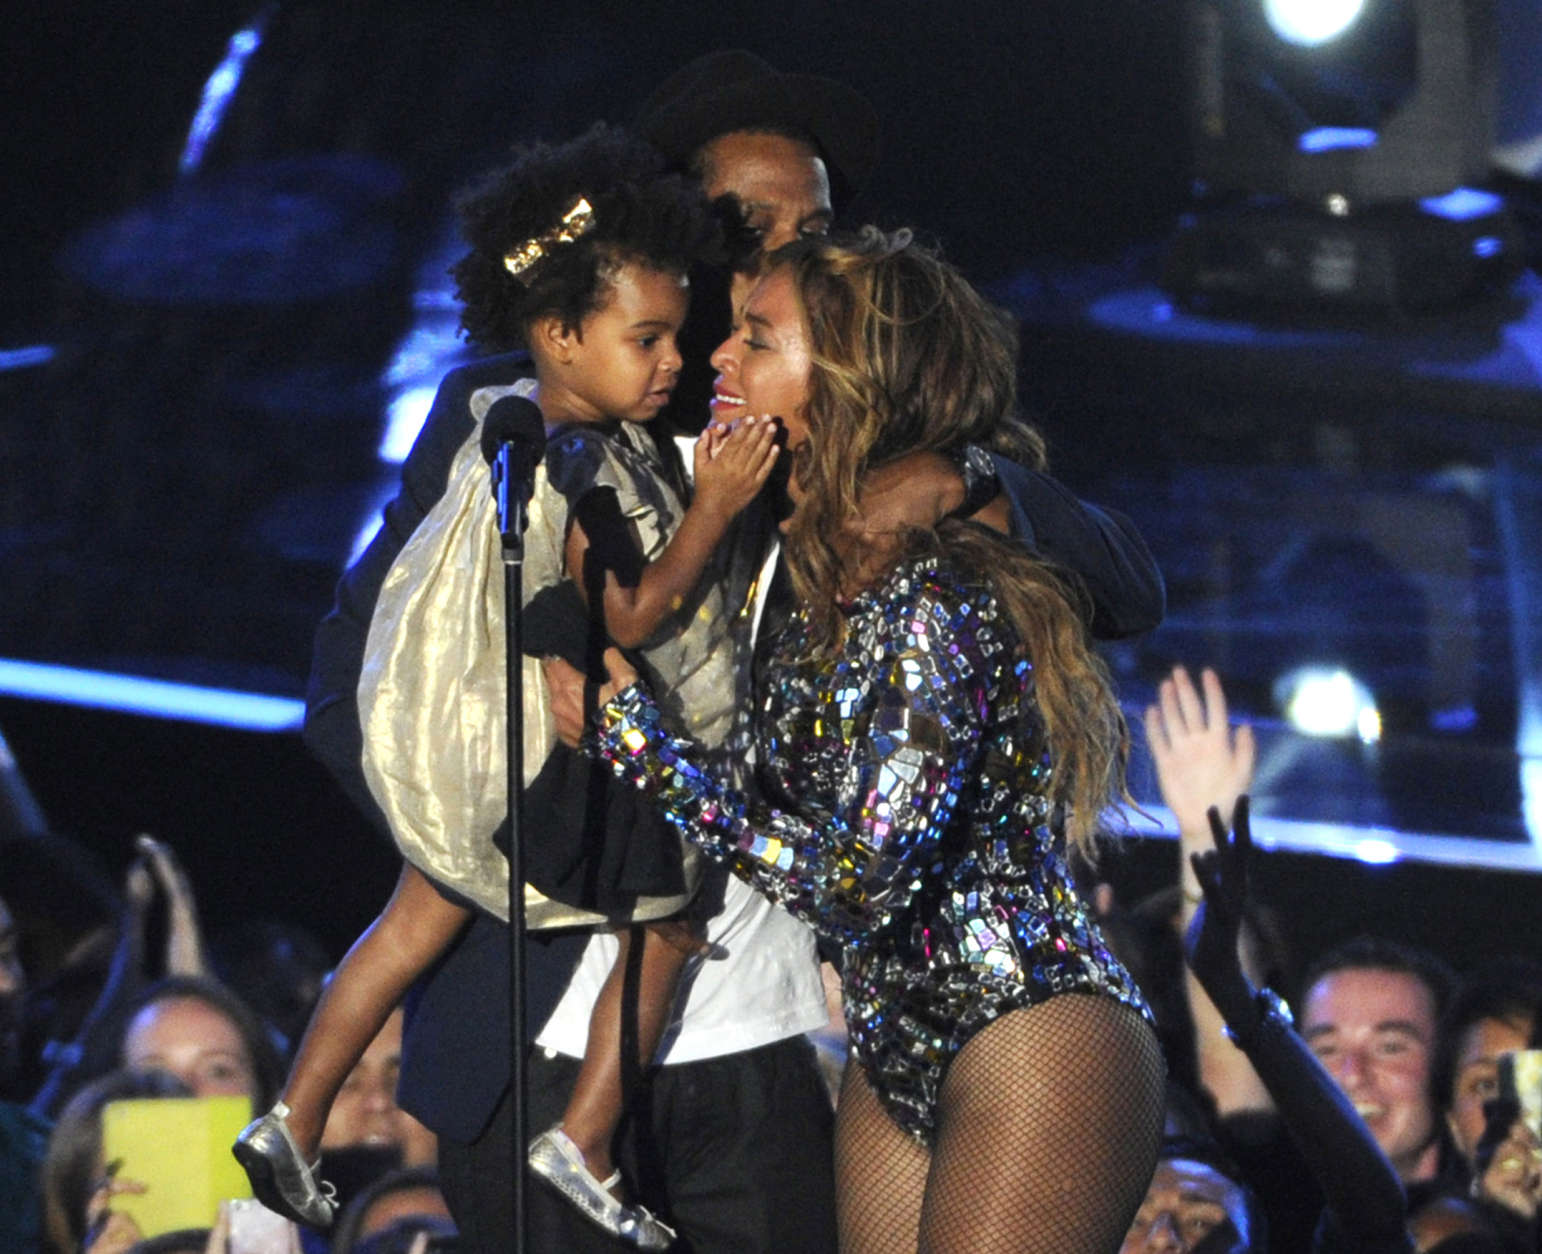 FILE - In this Sunday, Aug. 24, 2014 file photo, Beyonce on stage hugs Jay Z and their daughter Blue Ivy as she accepts the Video Vanguard Award at the MTV Video Music Awards at The Forum, in Inglewood, Calif. BET has suspended a producer after a joke about Blue Ivys hair aired Monday, Aug. 25, 2014, on the networks music video countdown show, 106 &amp; Park. A source at the network, who spoke on the condition of anonymity because the person was not allowed to discuss the matter publicly, said the producer was suspended after the ill-fitting joke about Beyonce and Jay Zs two-year-old daughter aired. (Photo by Chris Pizzello/Invision/AP, file)